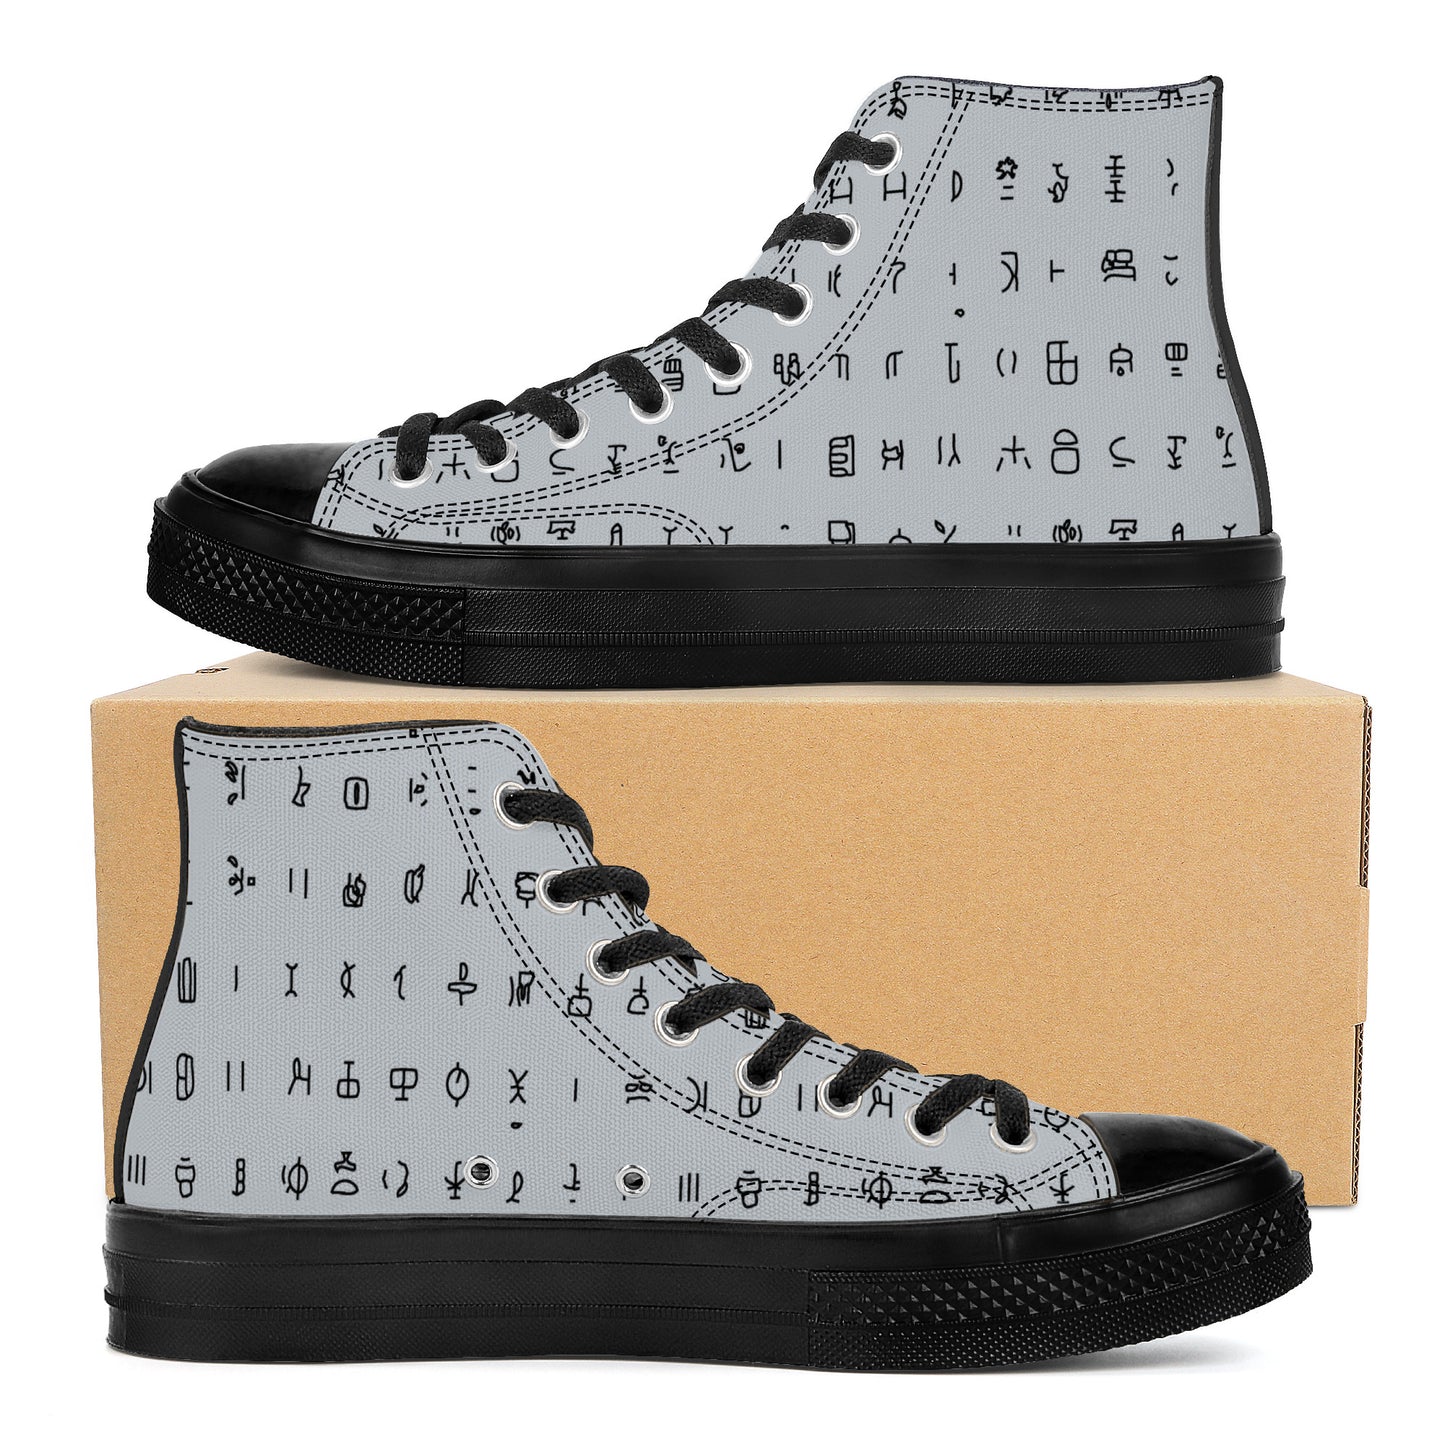 AZONTO TRADITION High Top Canvas Shoes - Black